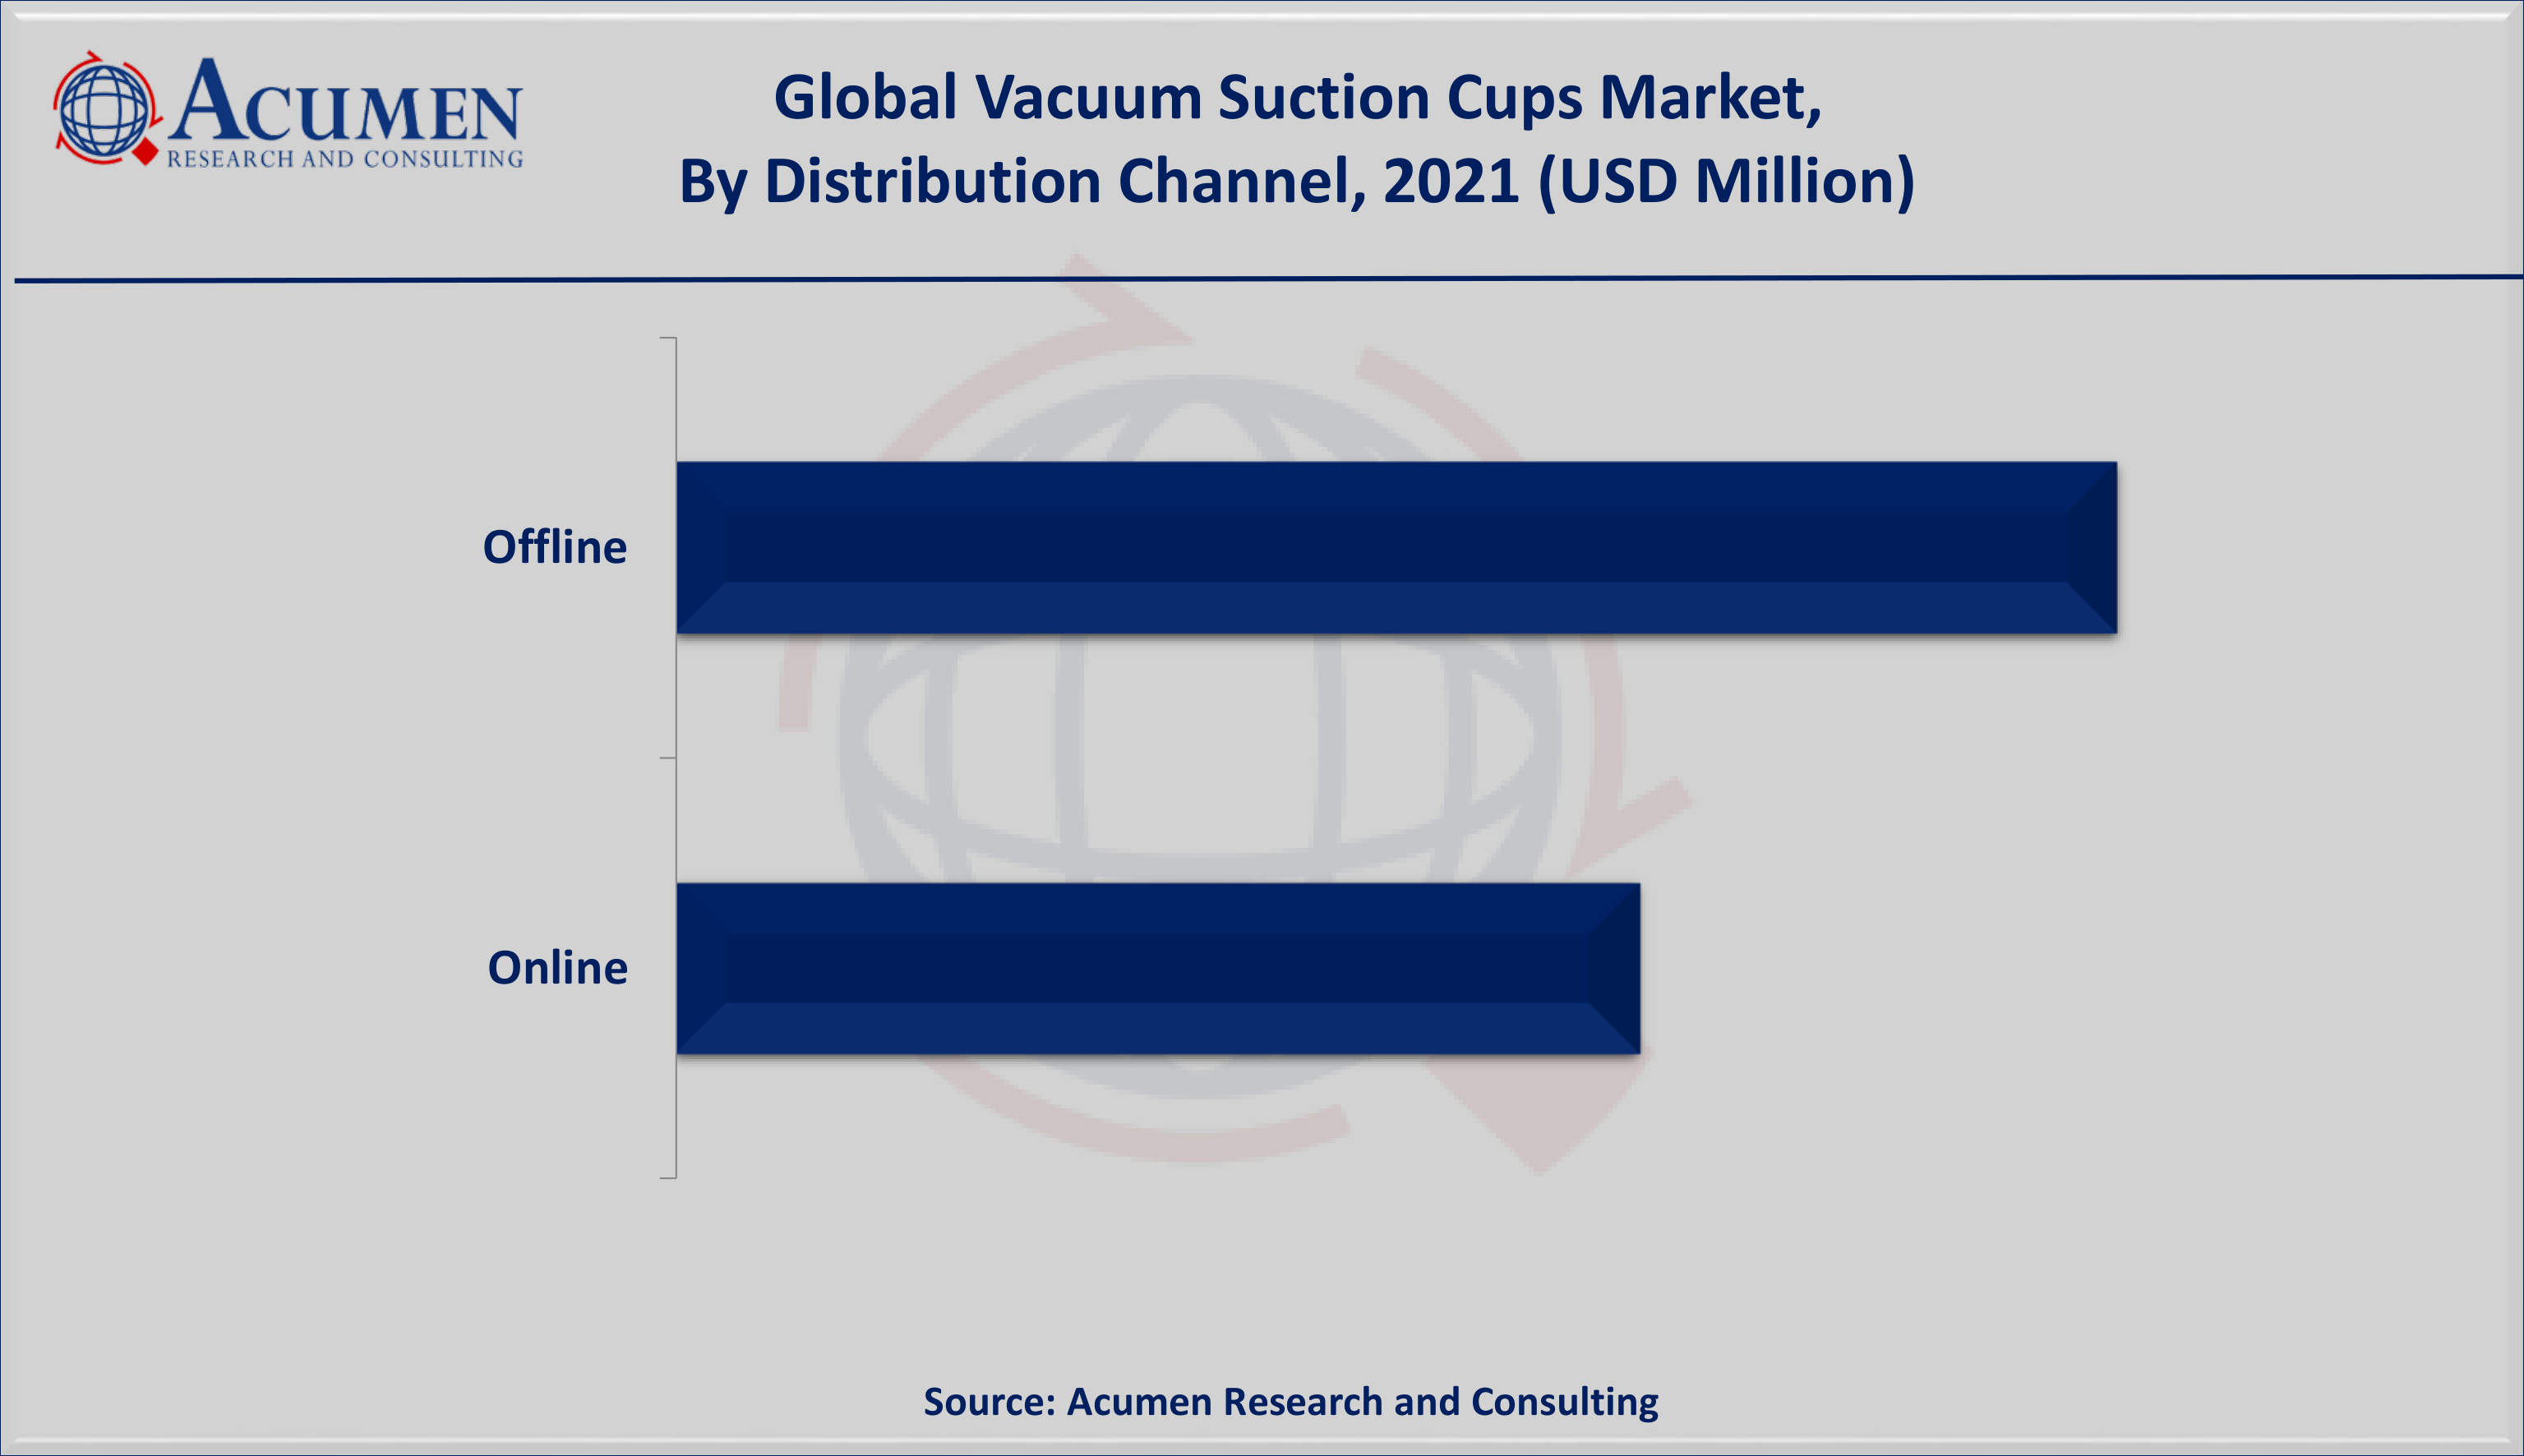 Vacuum Suction Cups Market Size was valued at USD 784 million in 2021 and is estimated to achieve a market size of USD 1,331 million by 2030